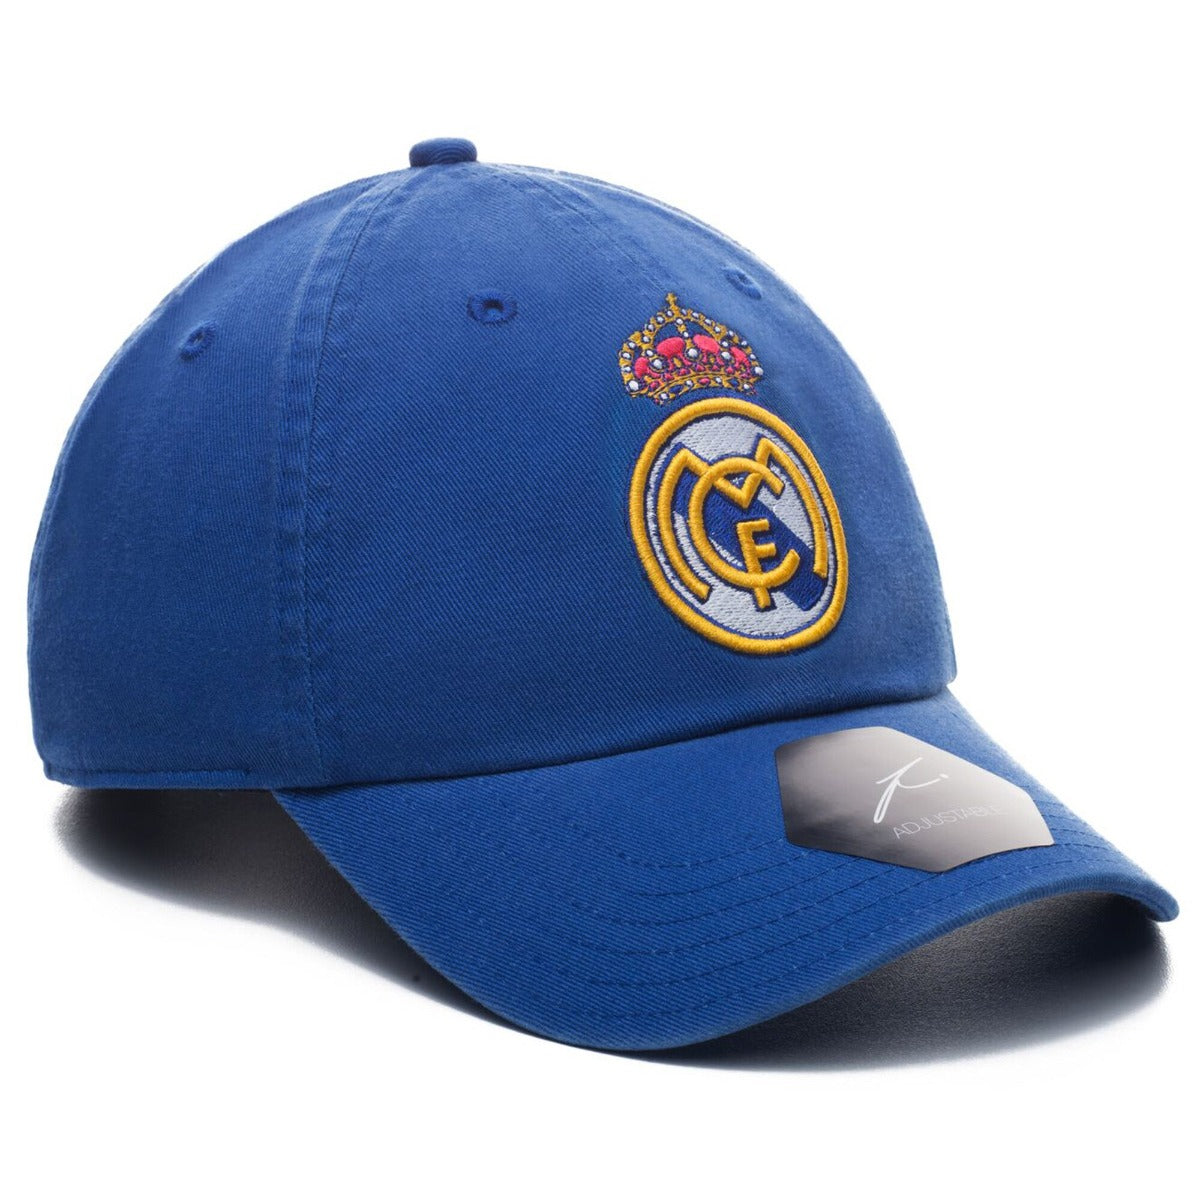 Fi Collection Real Madrid Adjustable Hat - Blue